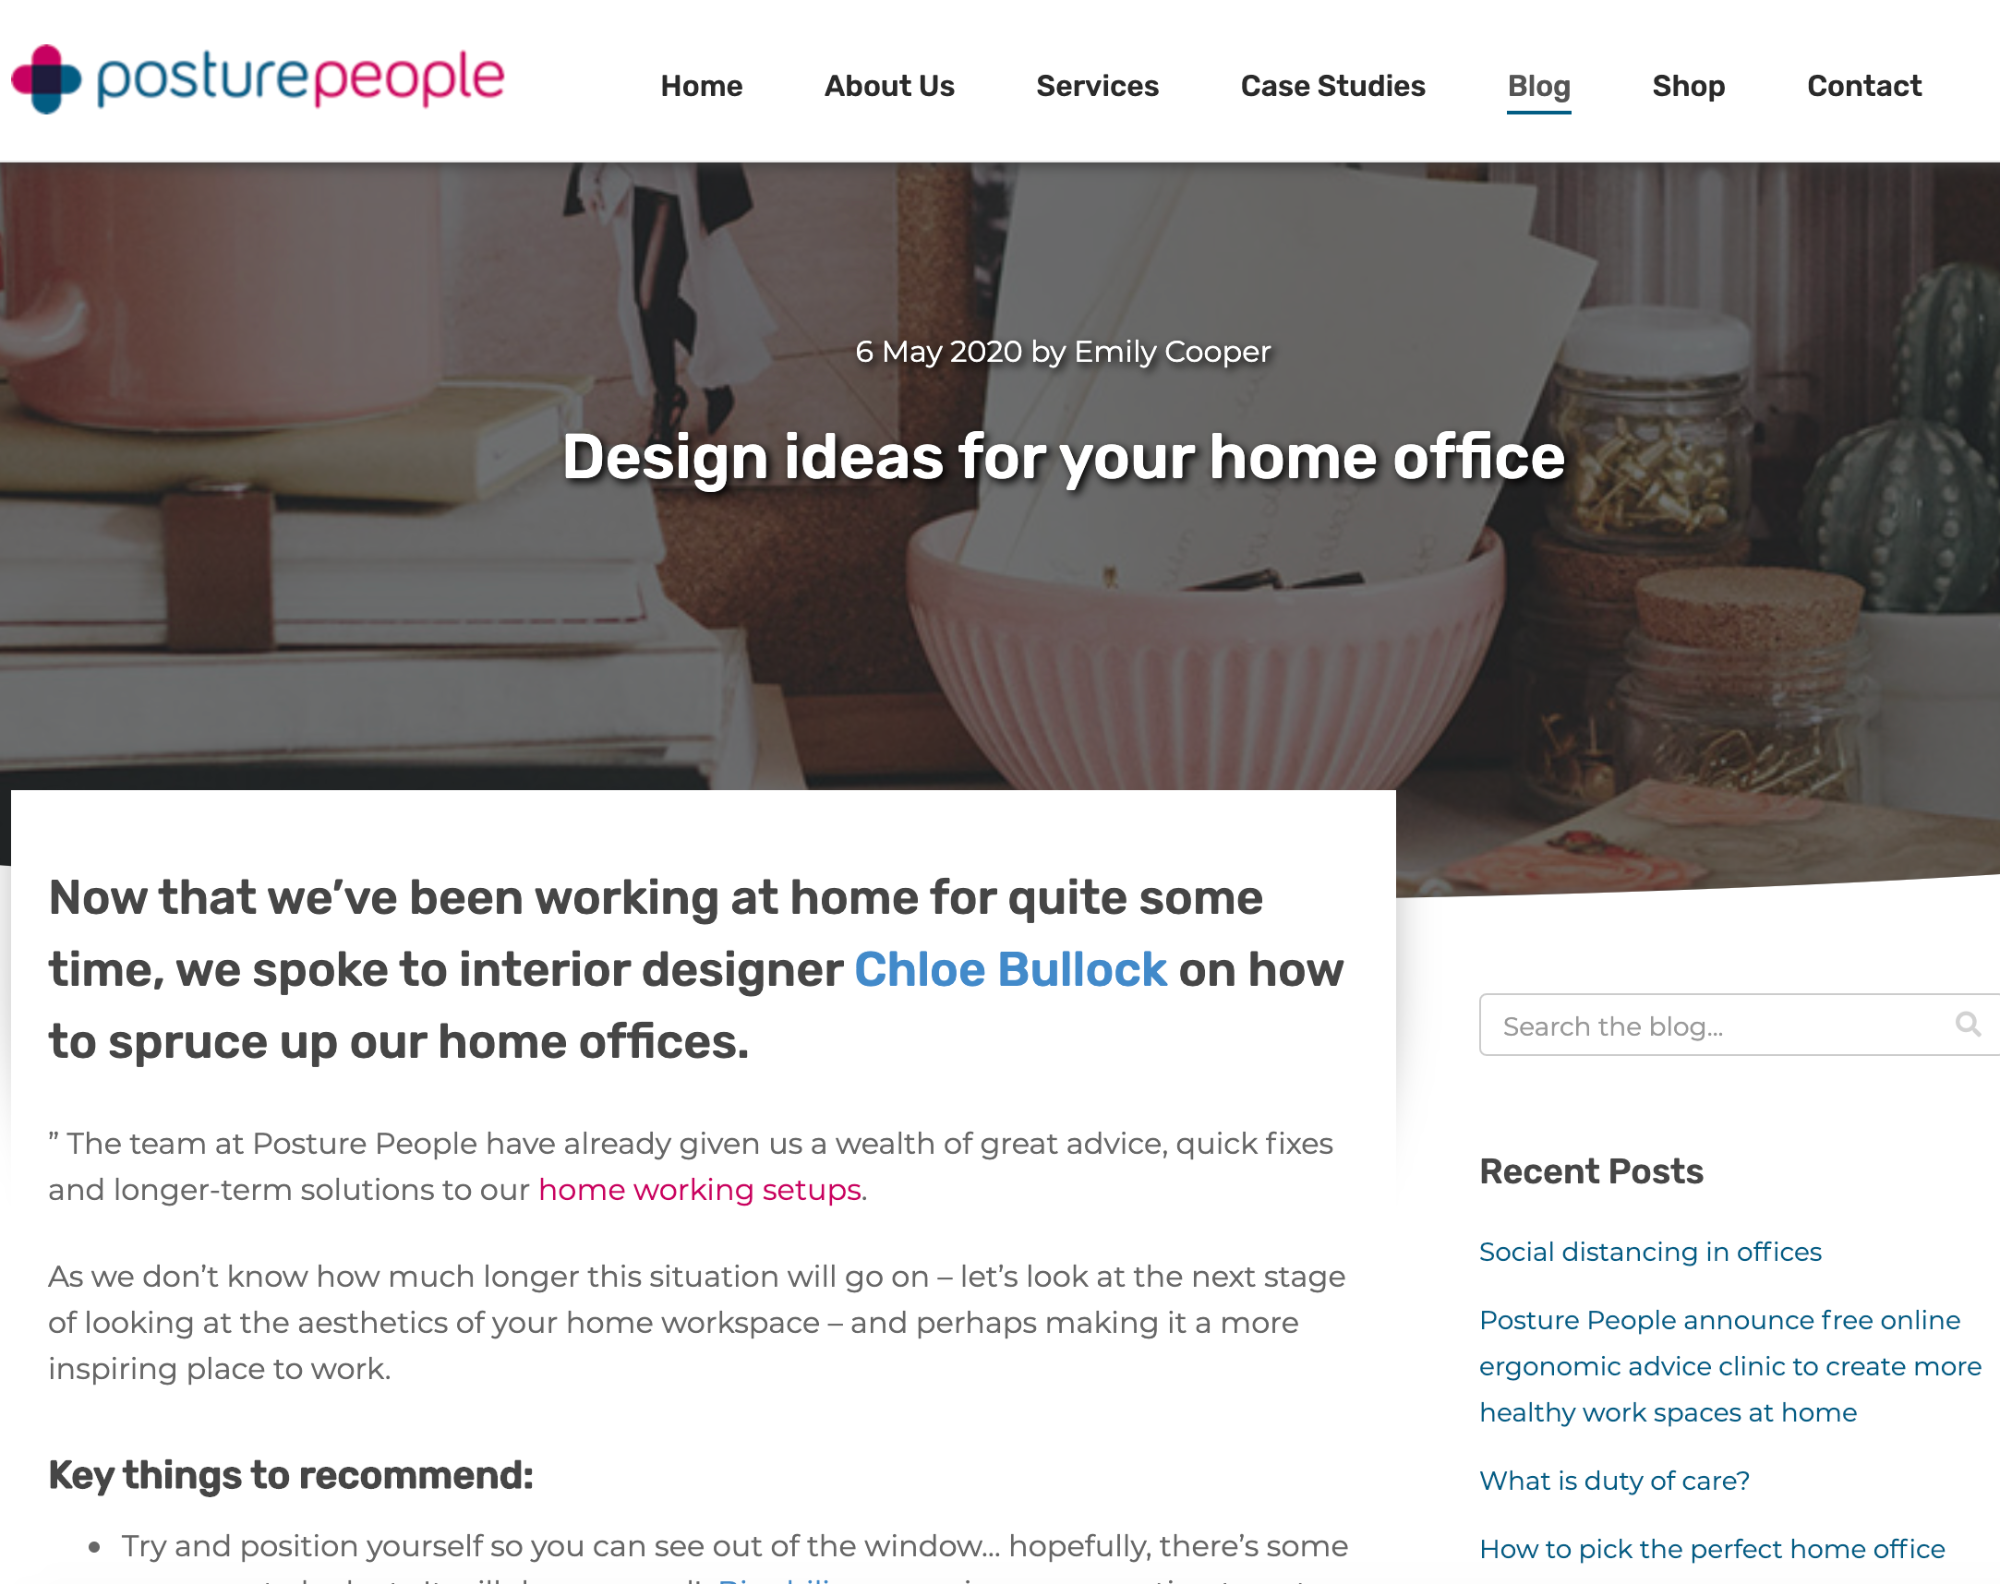 Posture People blog 'Design ideas for your home office' - June 2020